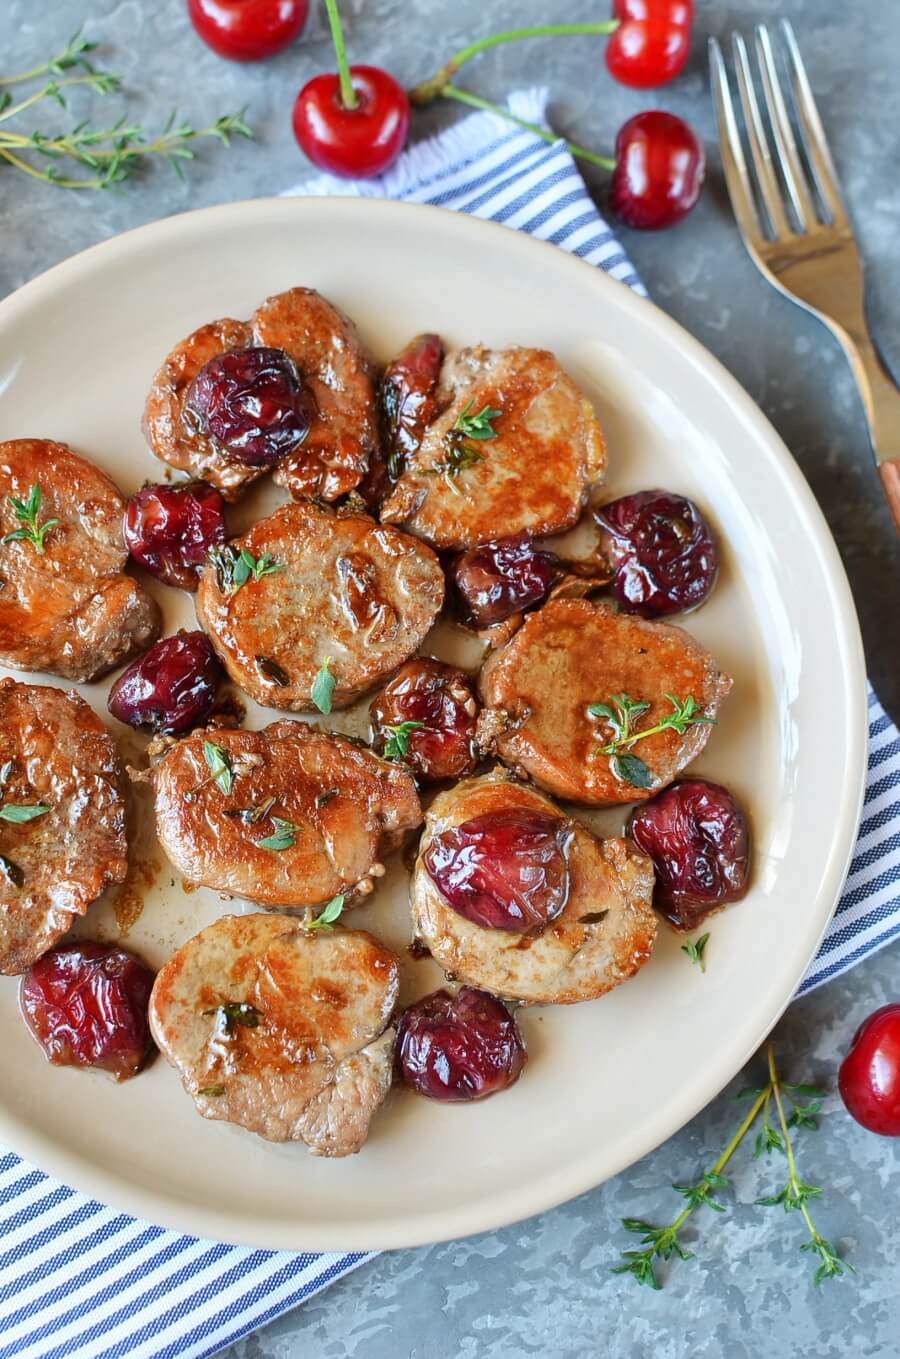 Pork Medallions with Red Wine-Cherry Sauce Recipe - Cook.me Recipes